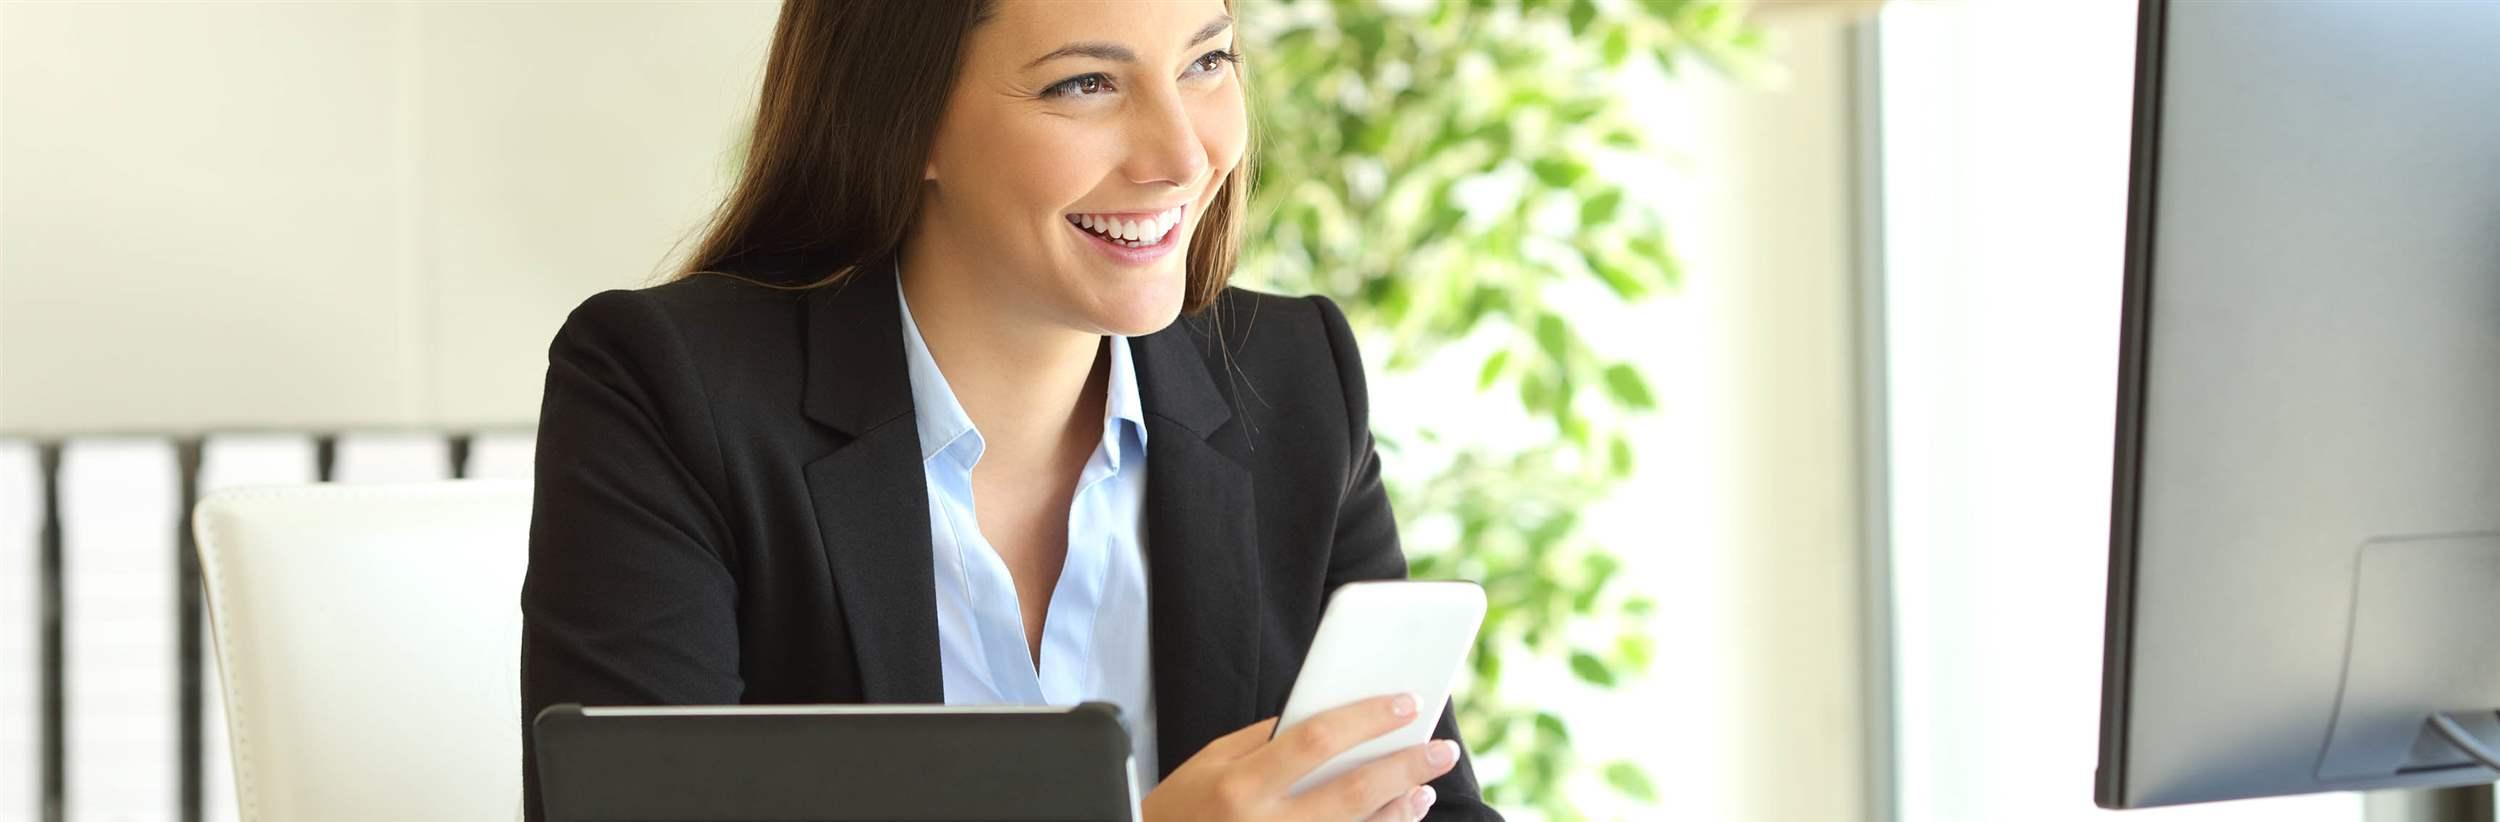 Happy businesswoman working on line with multiple devices and watching a desktop computer at office